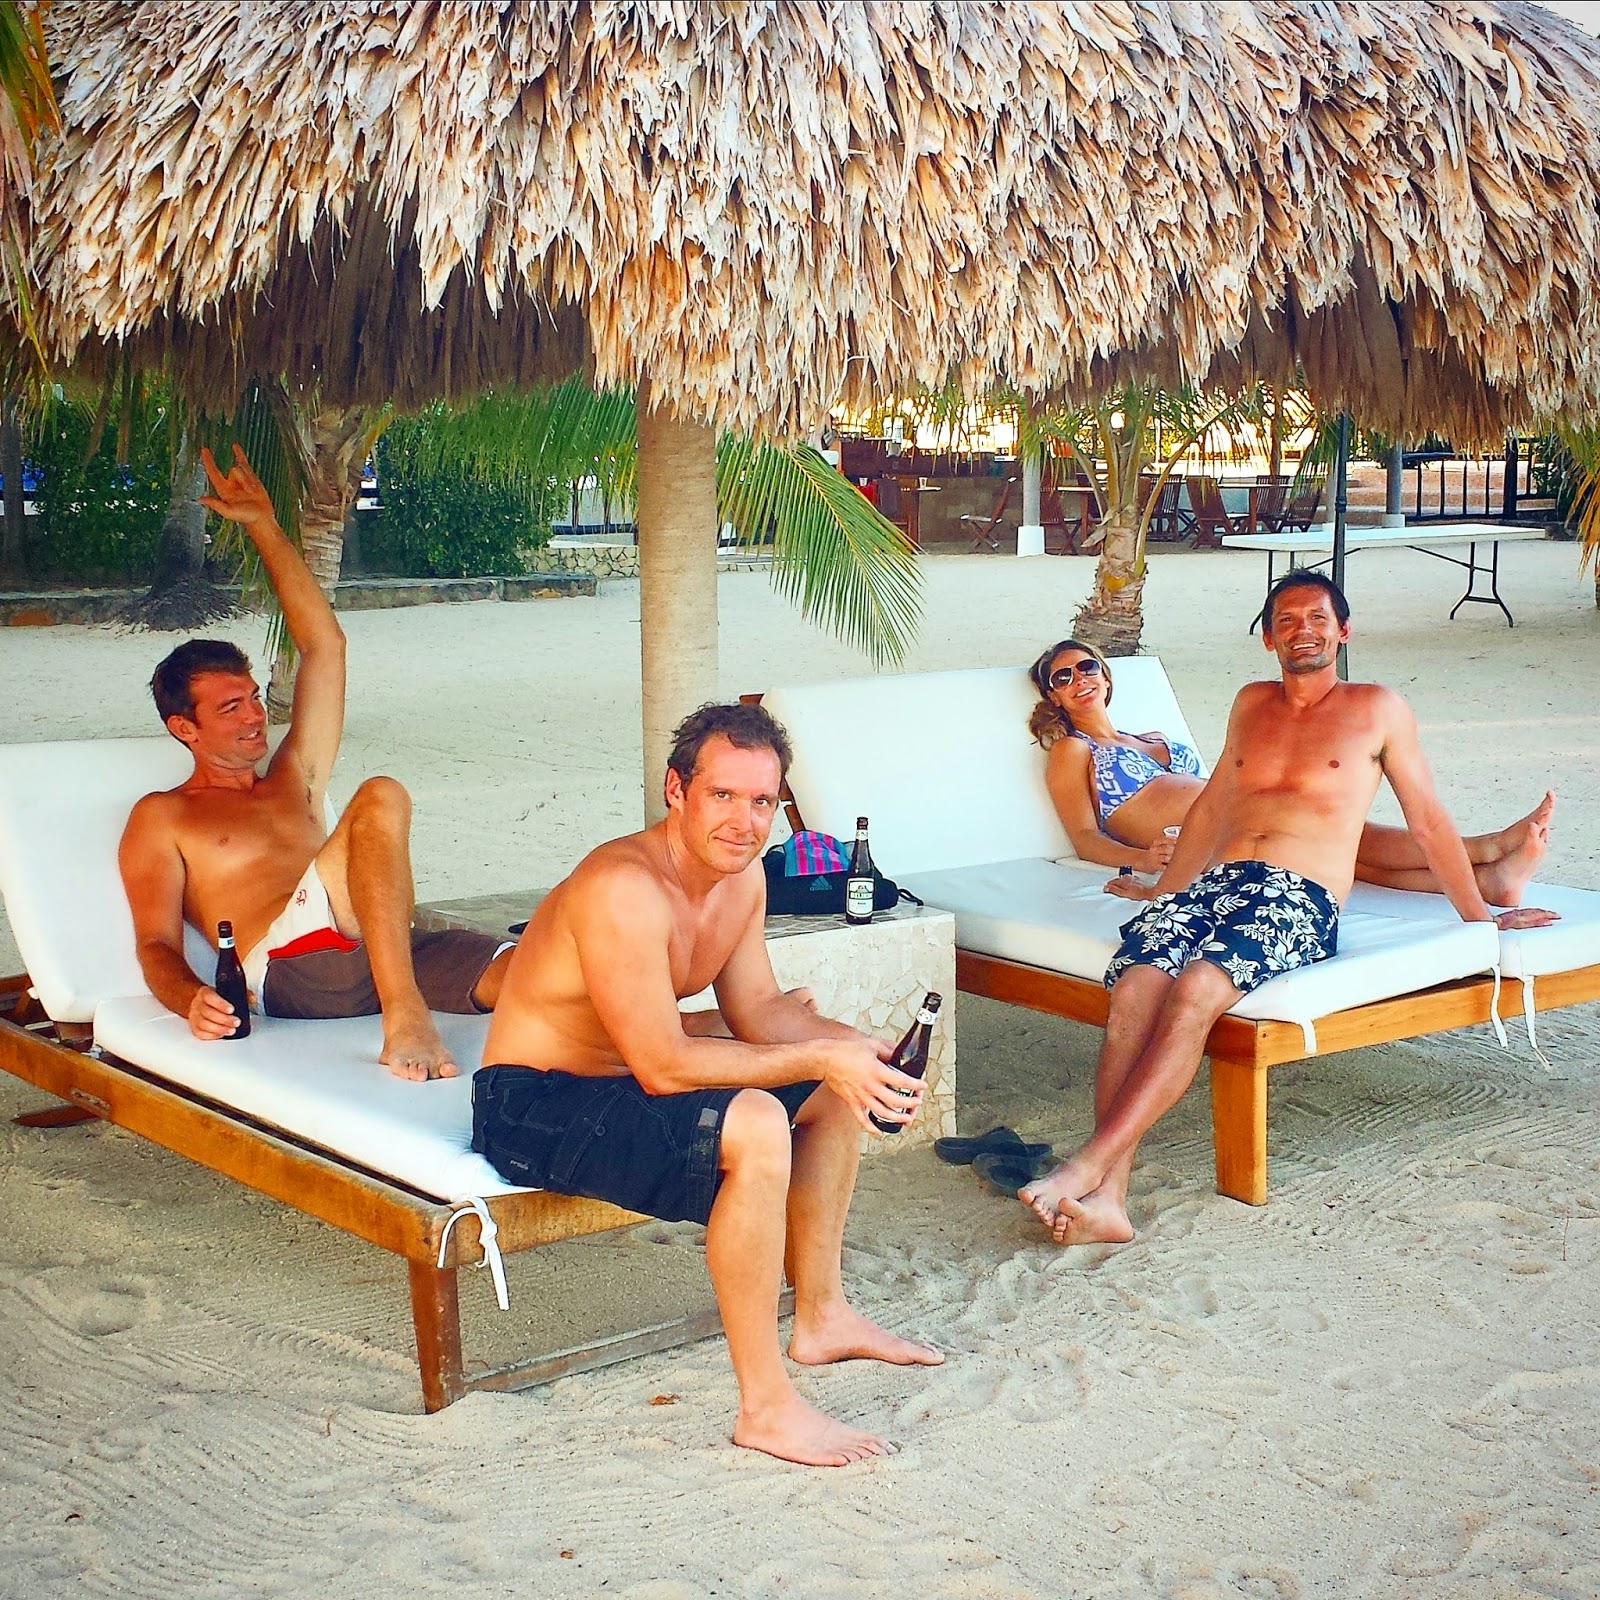 Remax Vip Belize: Placencia Hotel, and grab a drink, a dip in their pool